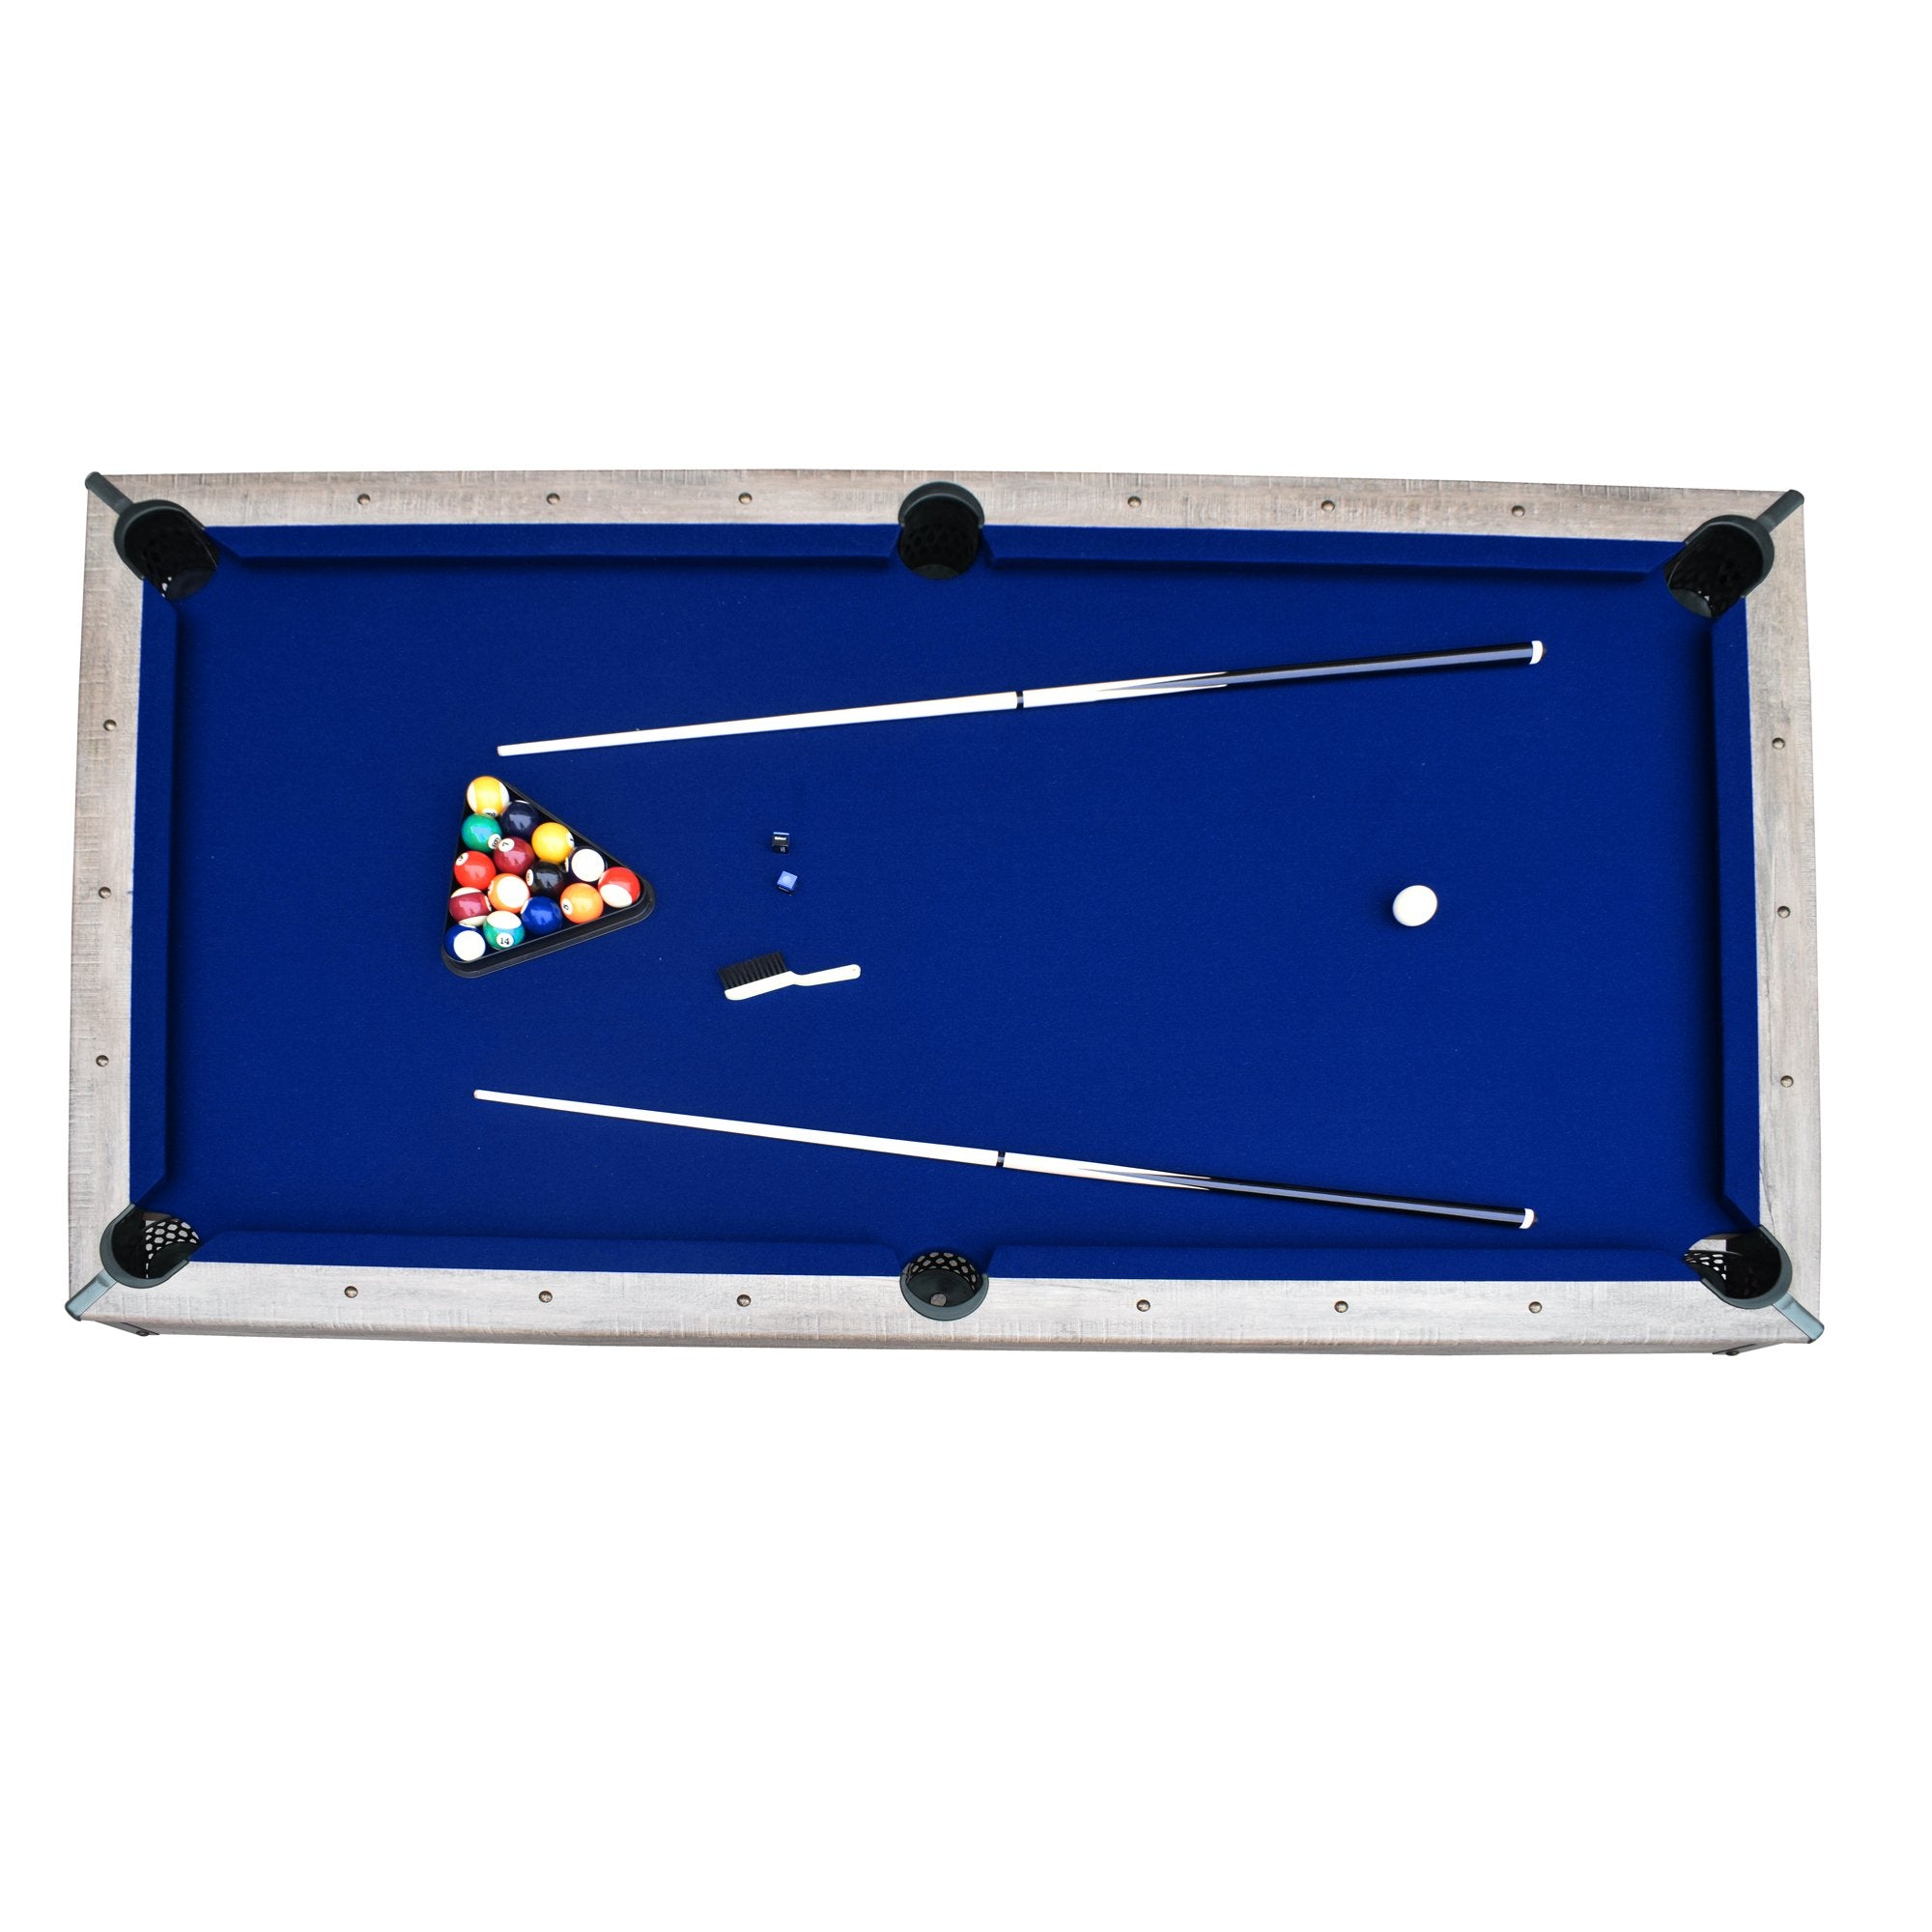 Hathaway Logan 7-ft 3 in 1 Pool Table with Benches